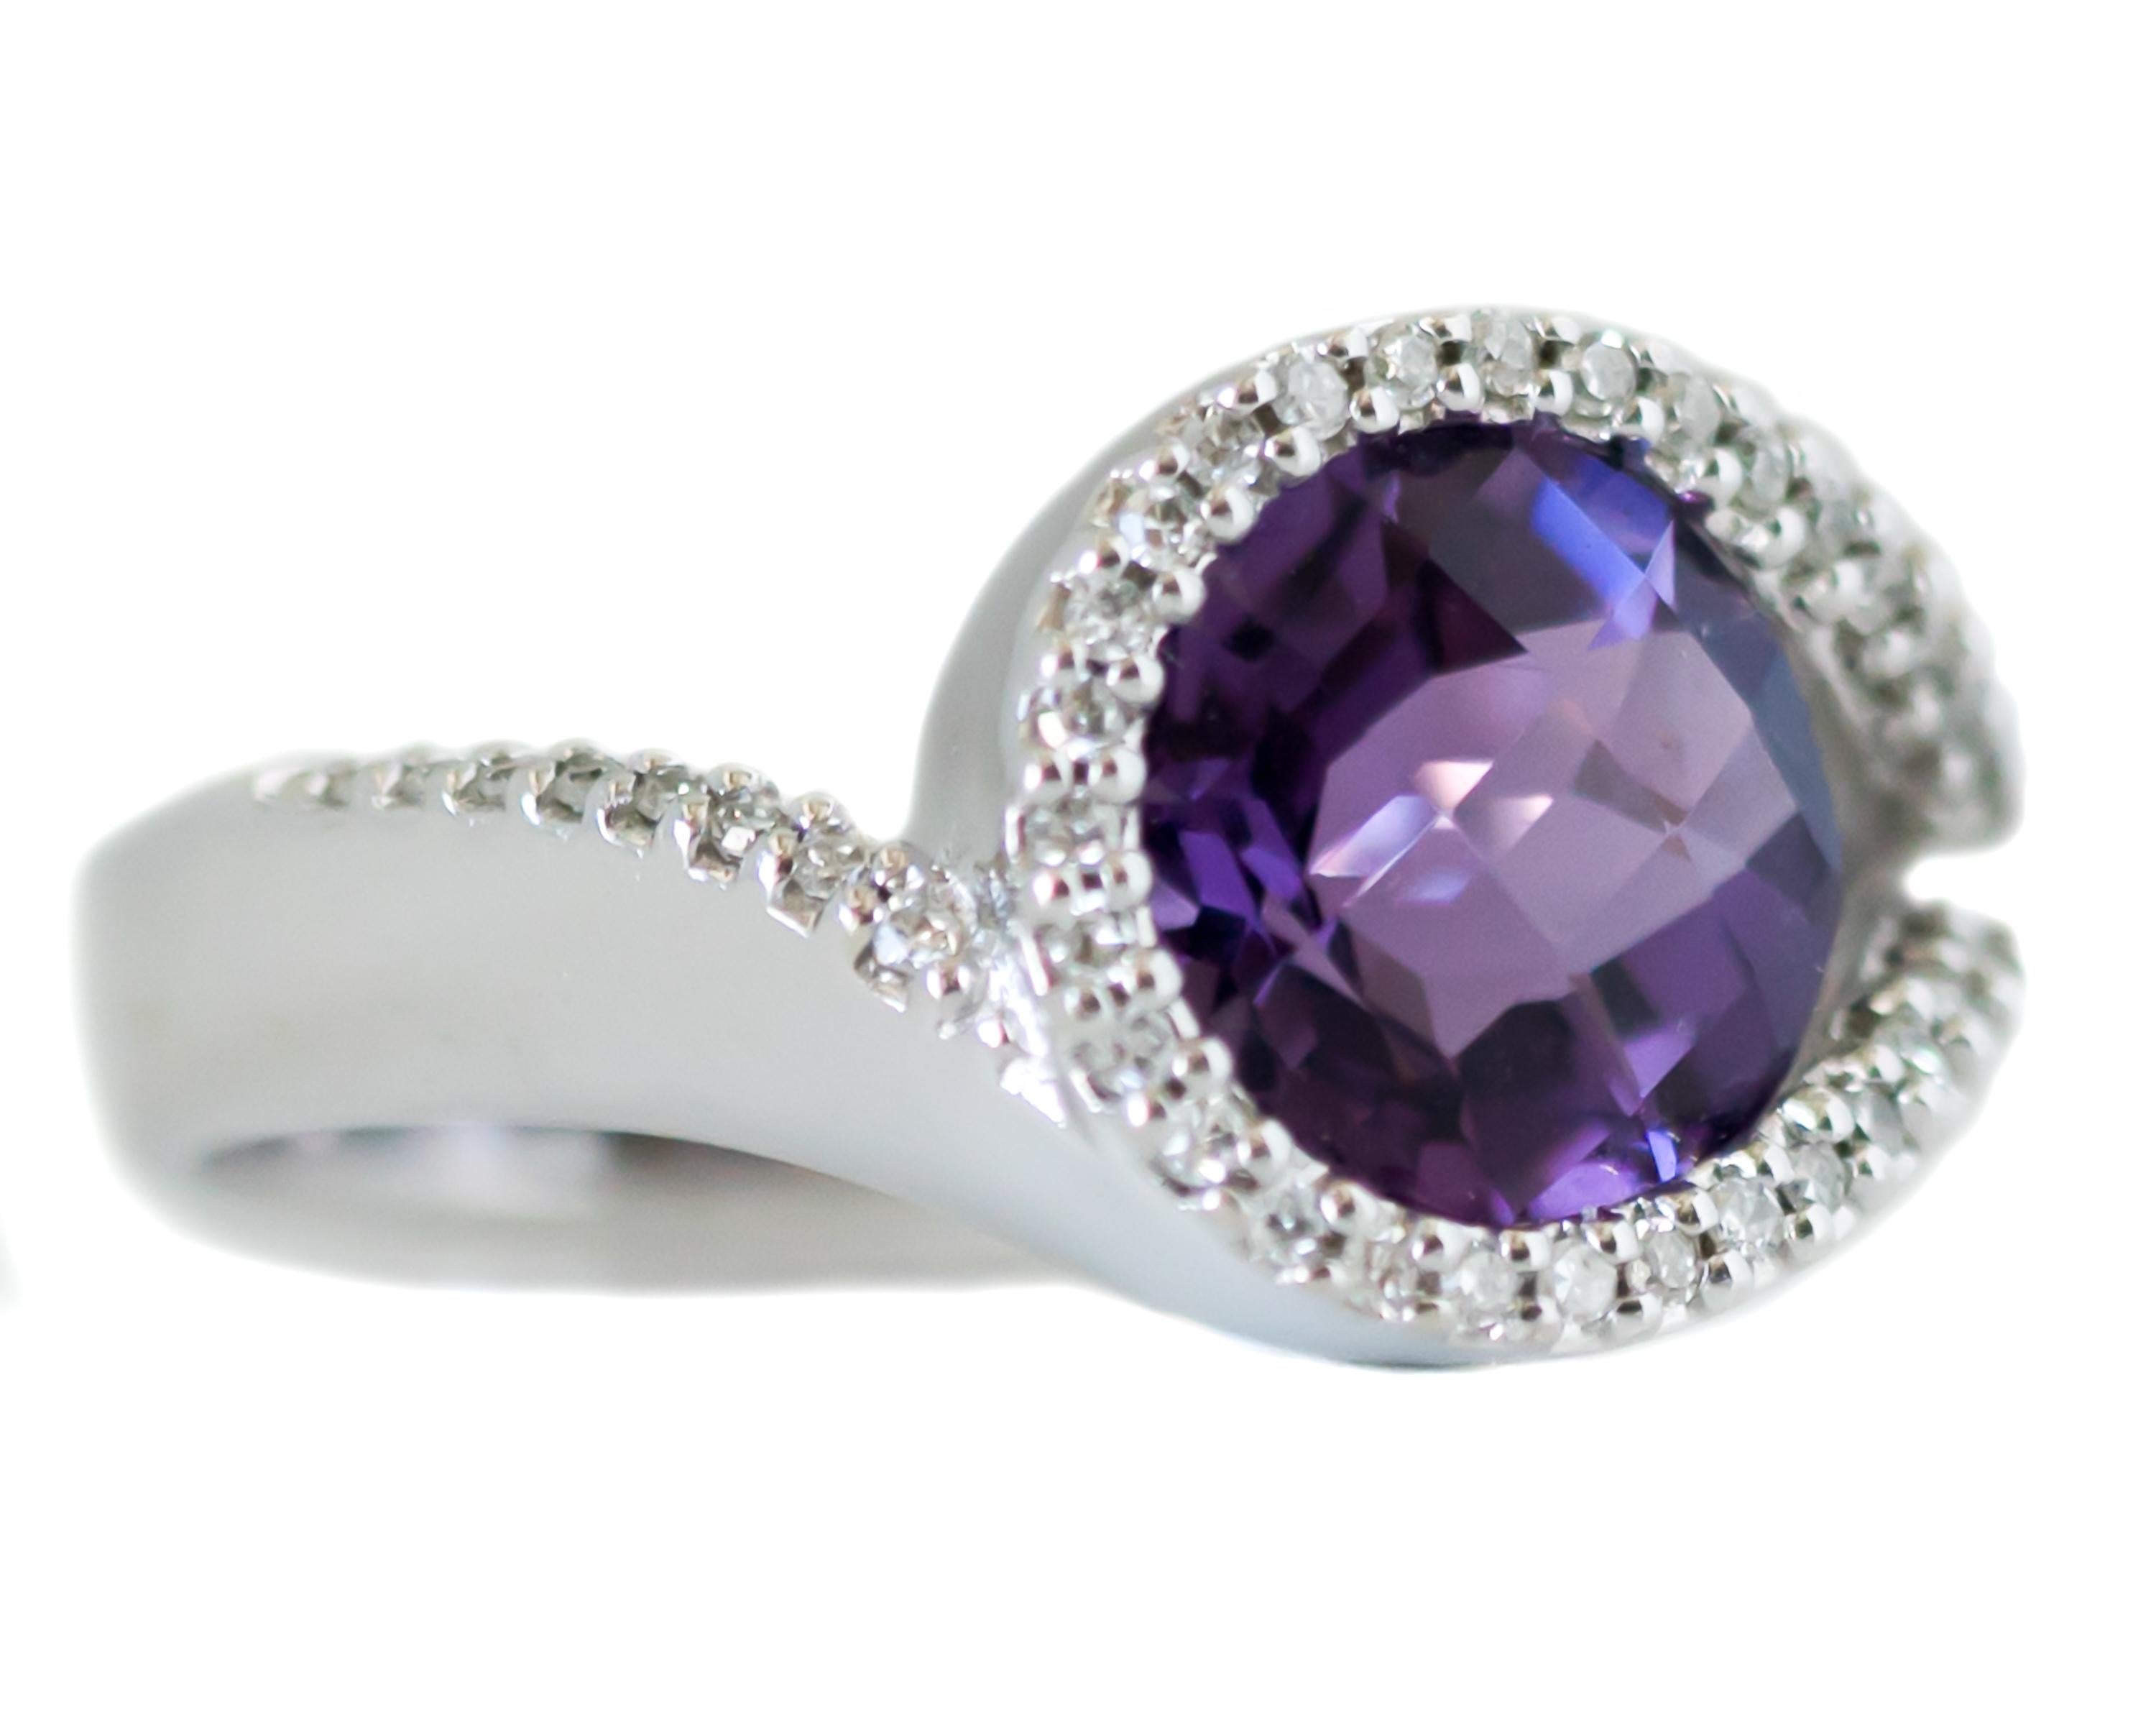 1980s Round Amethyst Ring - 14 Karat White Gold, Purple Amethyst, Diamonds

Features:
2.0 carat Checkerboard cut Round Purple Amethyst center stone
0.50 carat total Single cut Diamond modified Halo and Shoulders
Modified Bypass setting
14 Karat